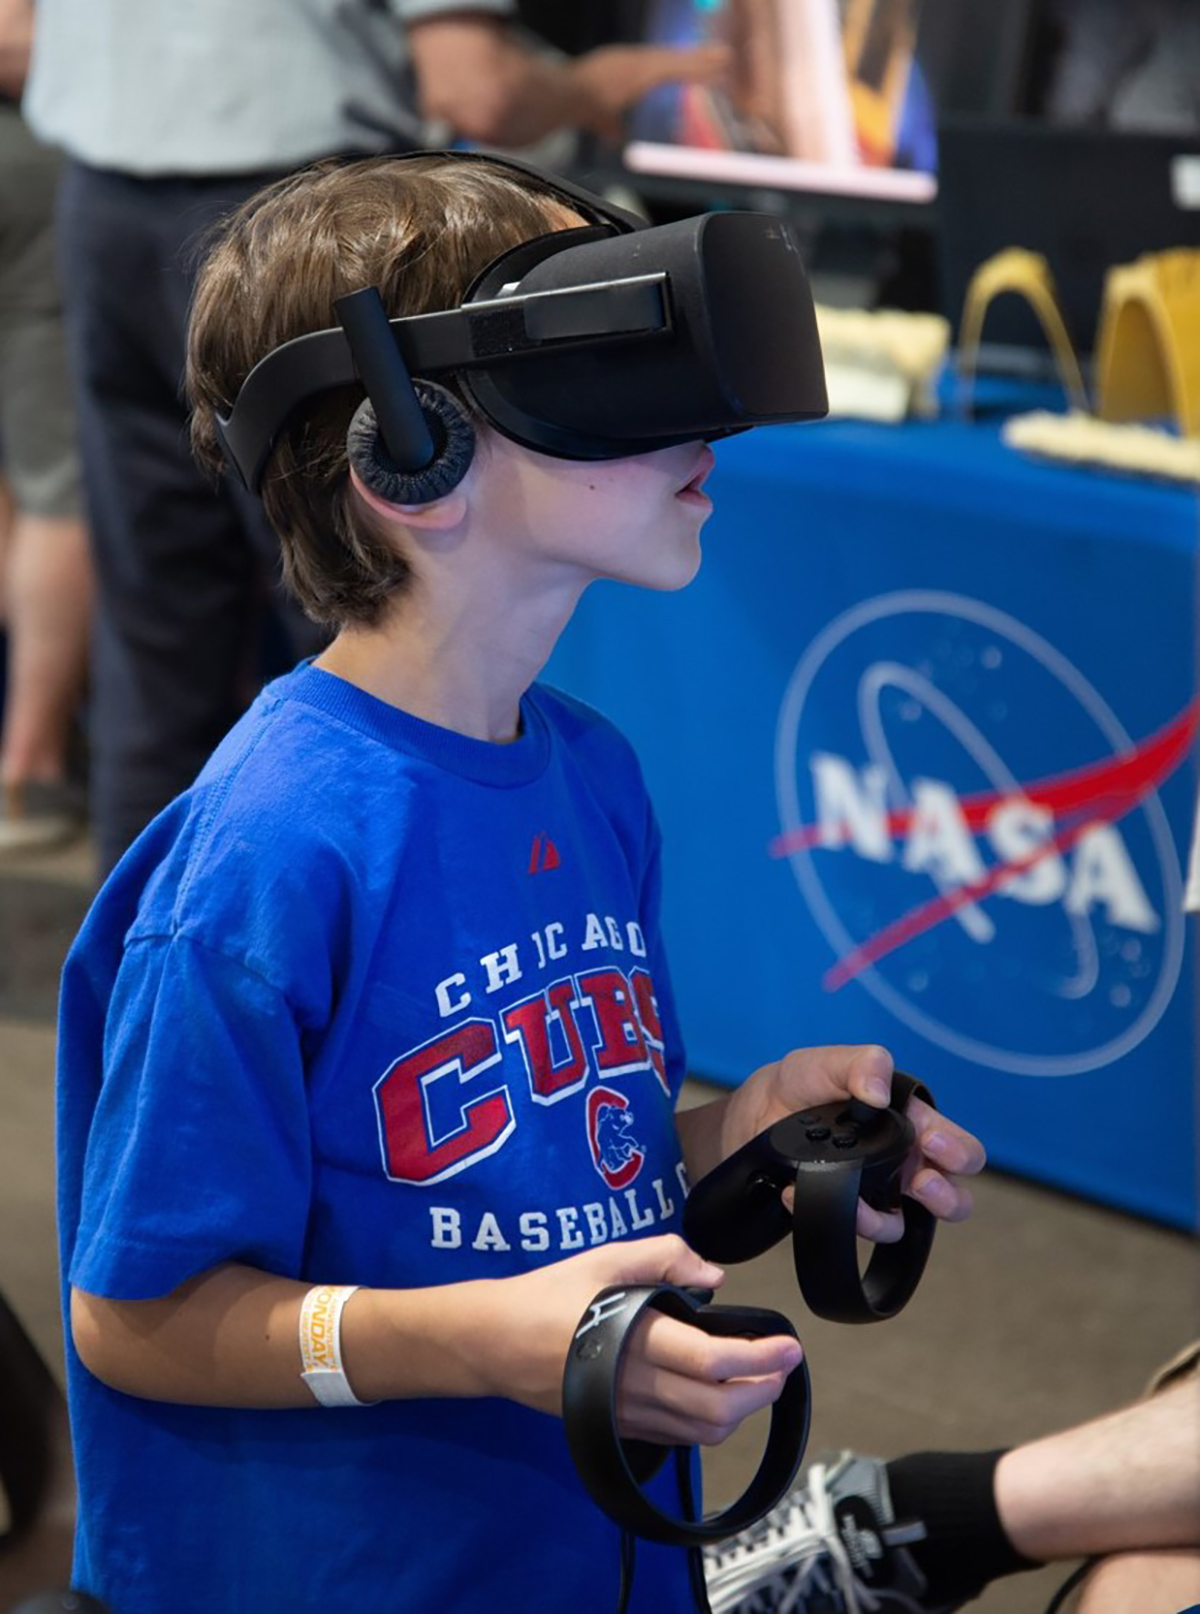 A young boy wearing virtual reality goggles.